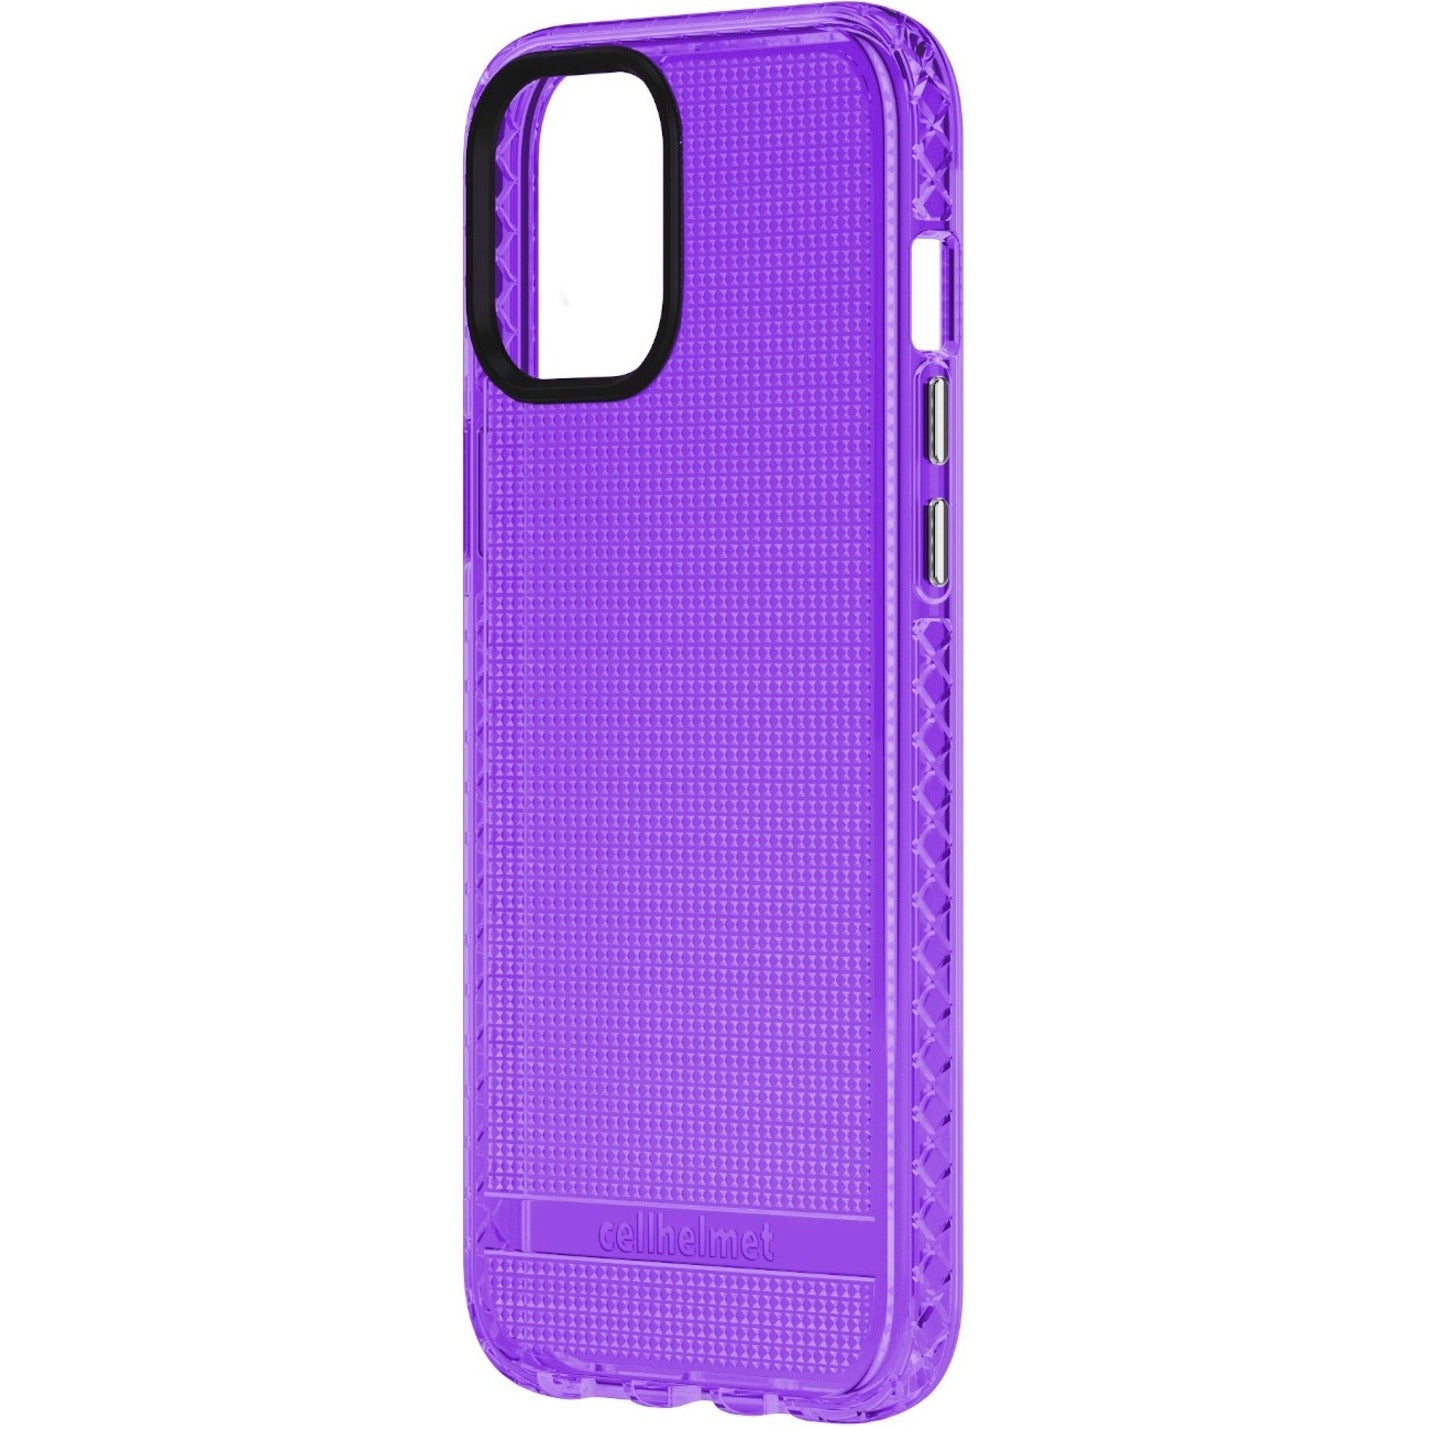 Altitude X Series Purple Case for iPhone 12 Pro Max [Discontinued]